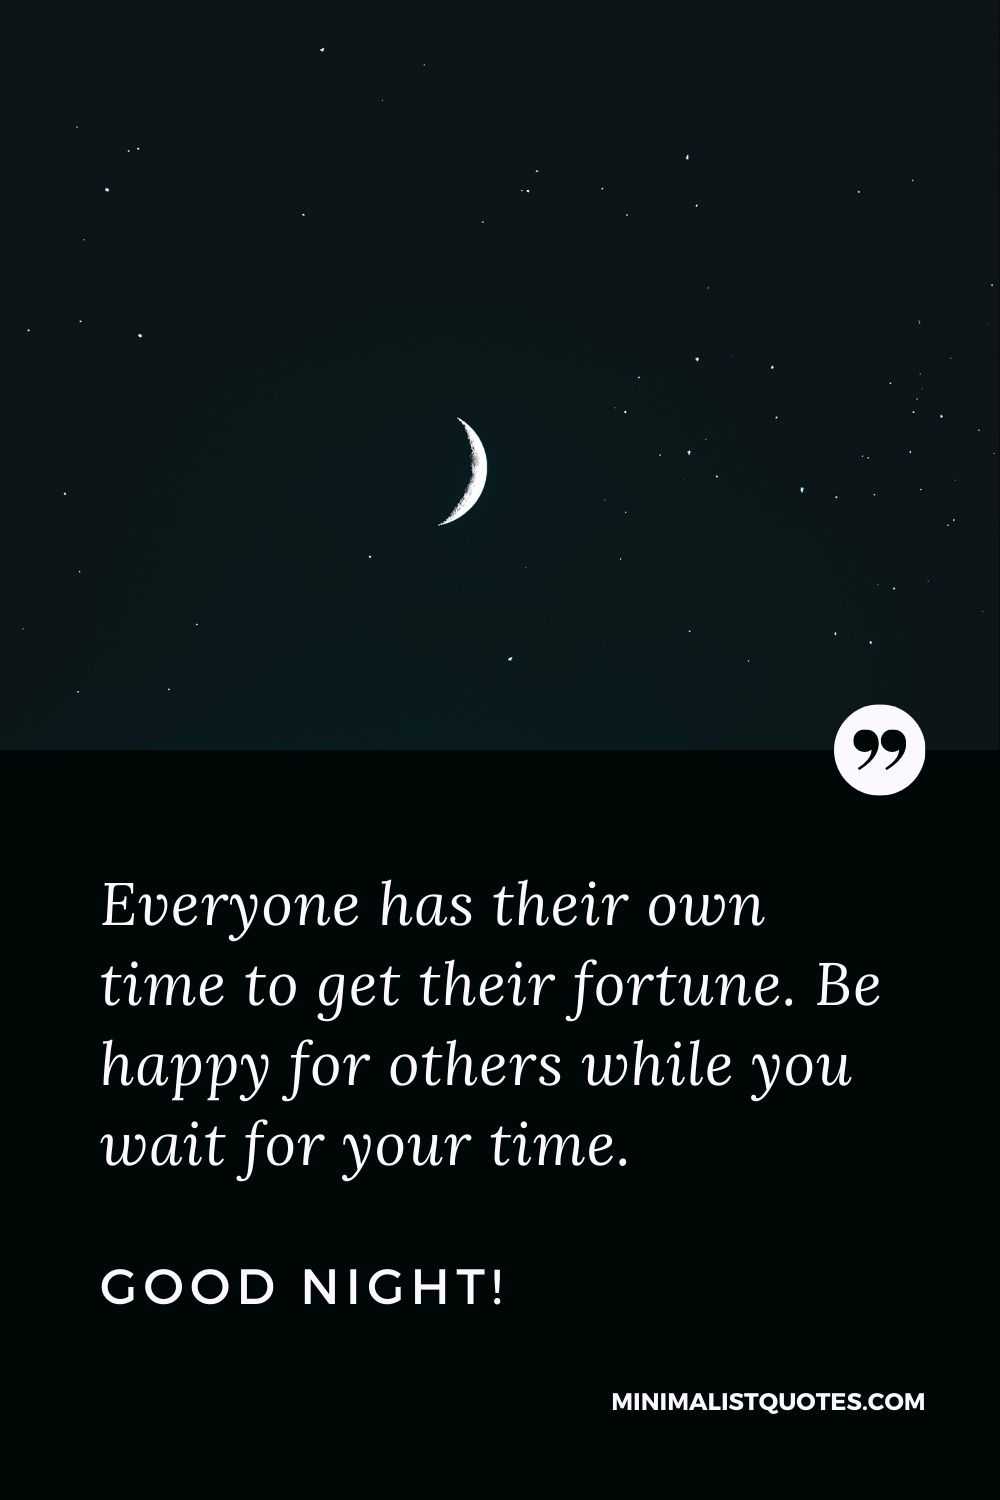 Night Wish, Quote & Message: Everyone has their own time to get their fortune. Be happy for others while you wait for your time. Good Night!